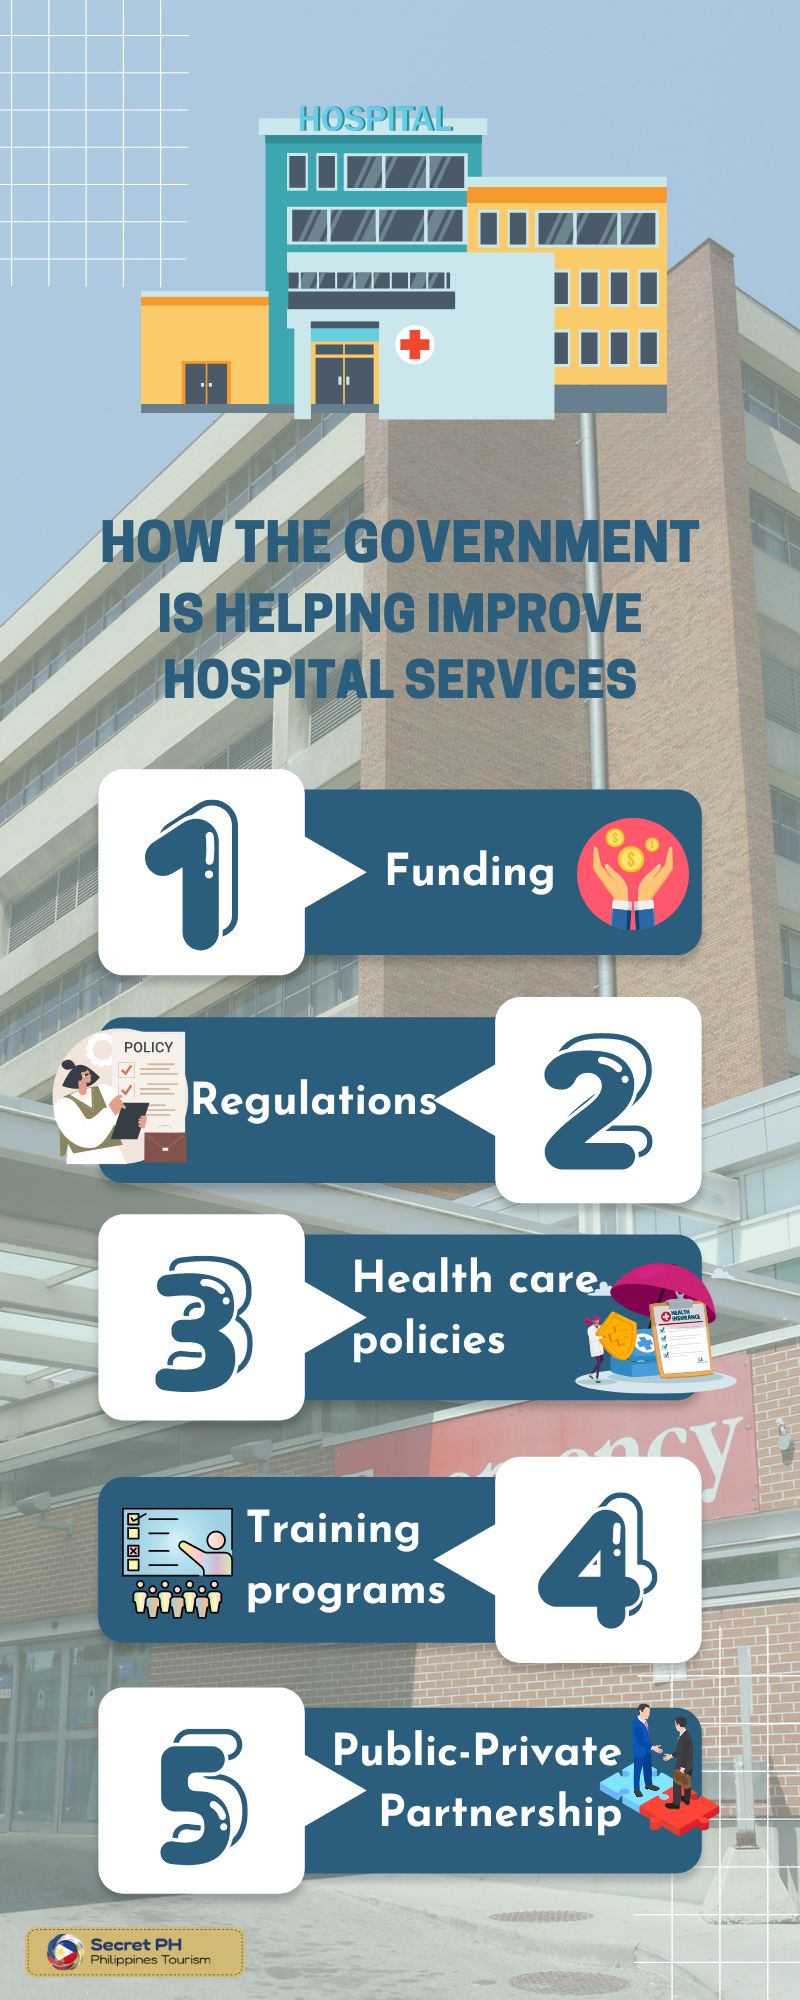 How the government is helping improve hospital services